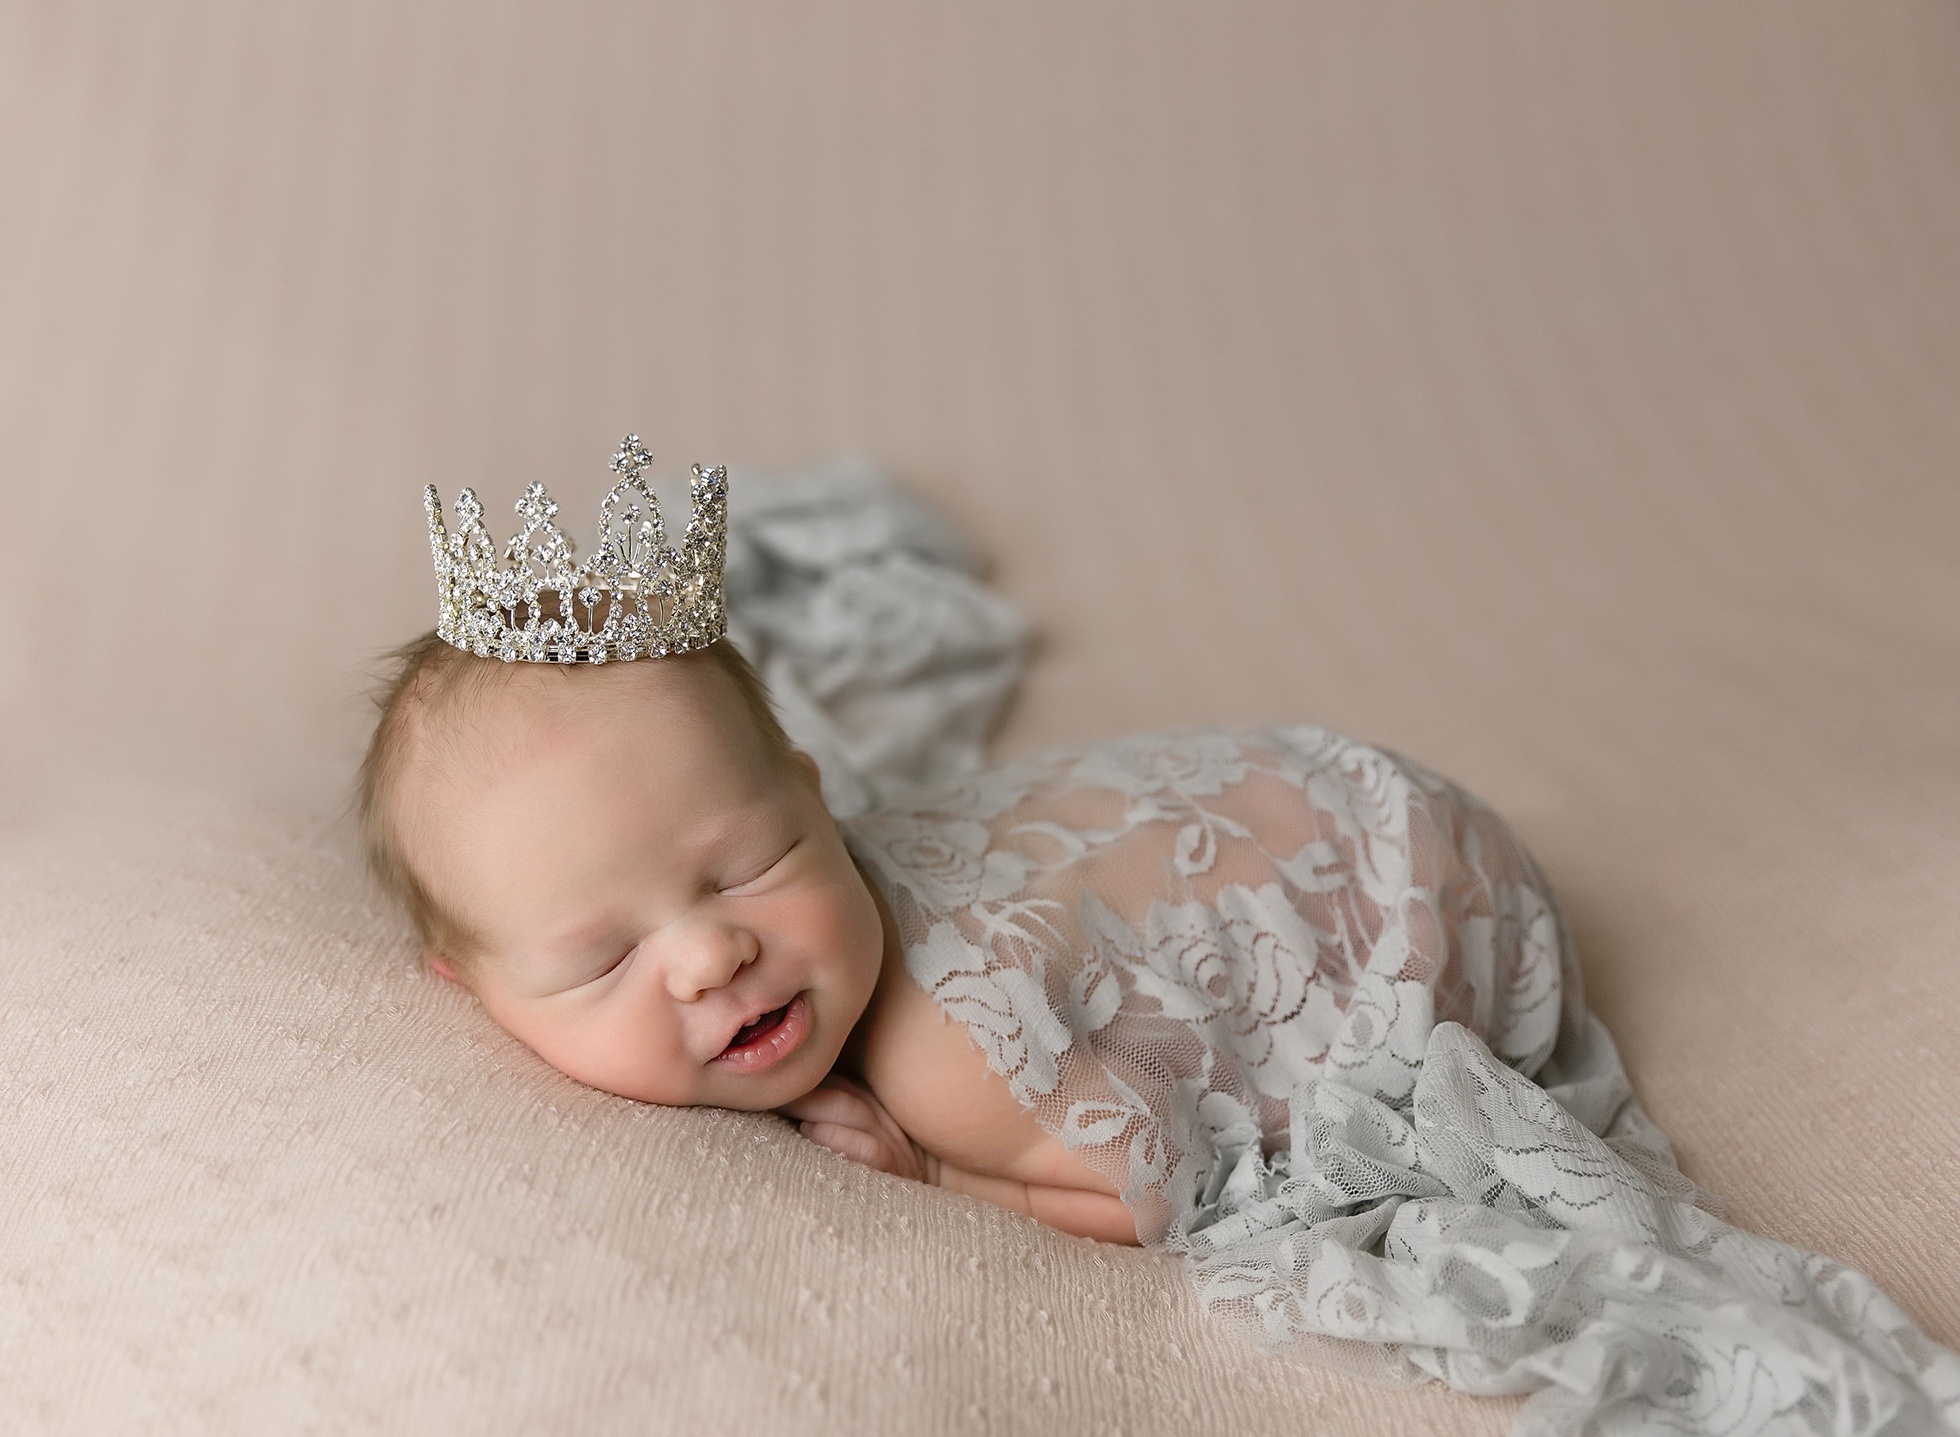 Download wallpaper angel, crown, baby, section mood in resolution 1960x1437...